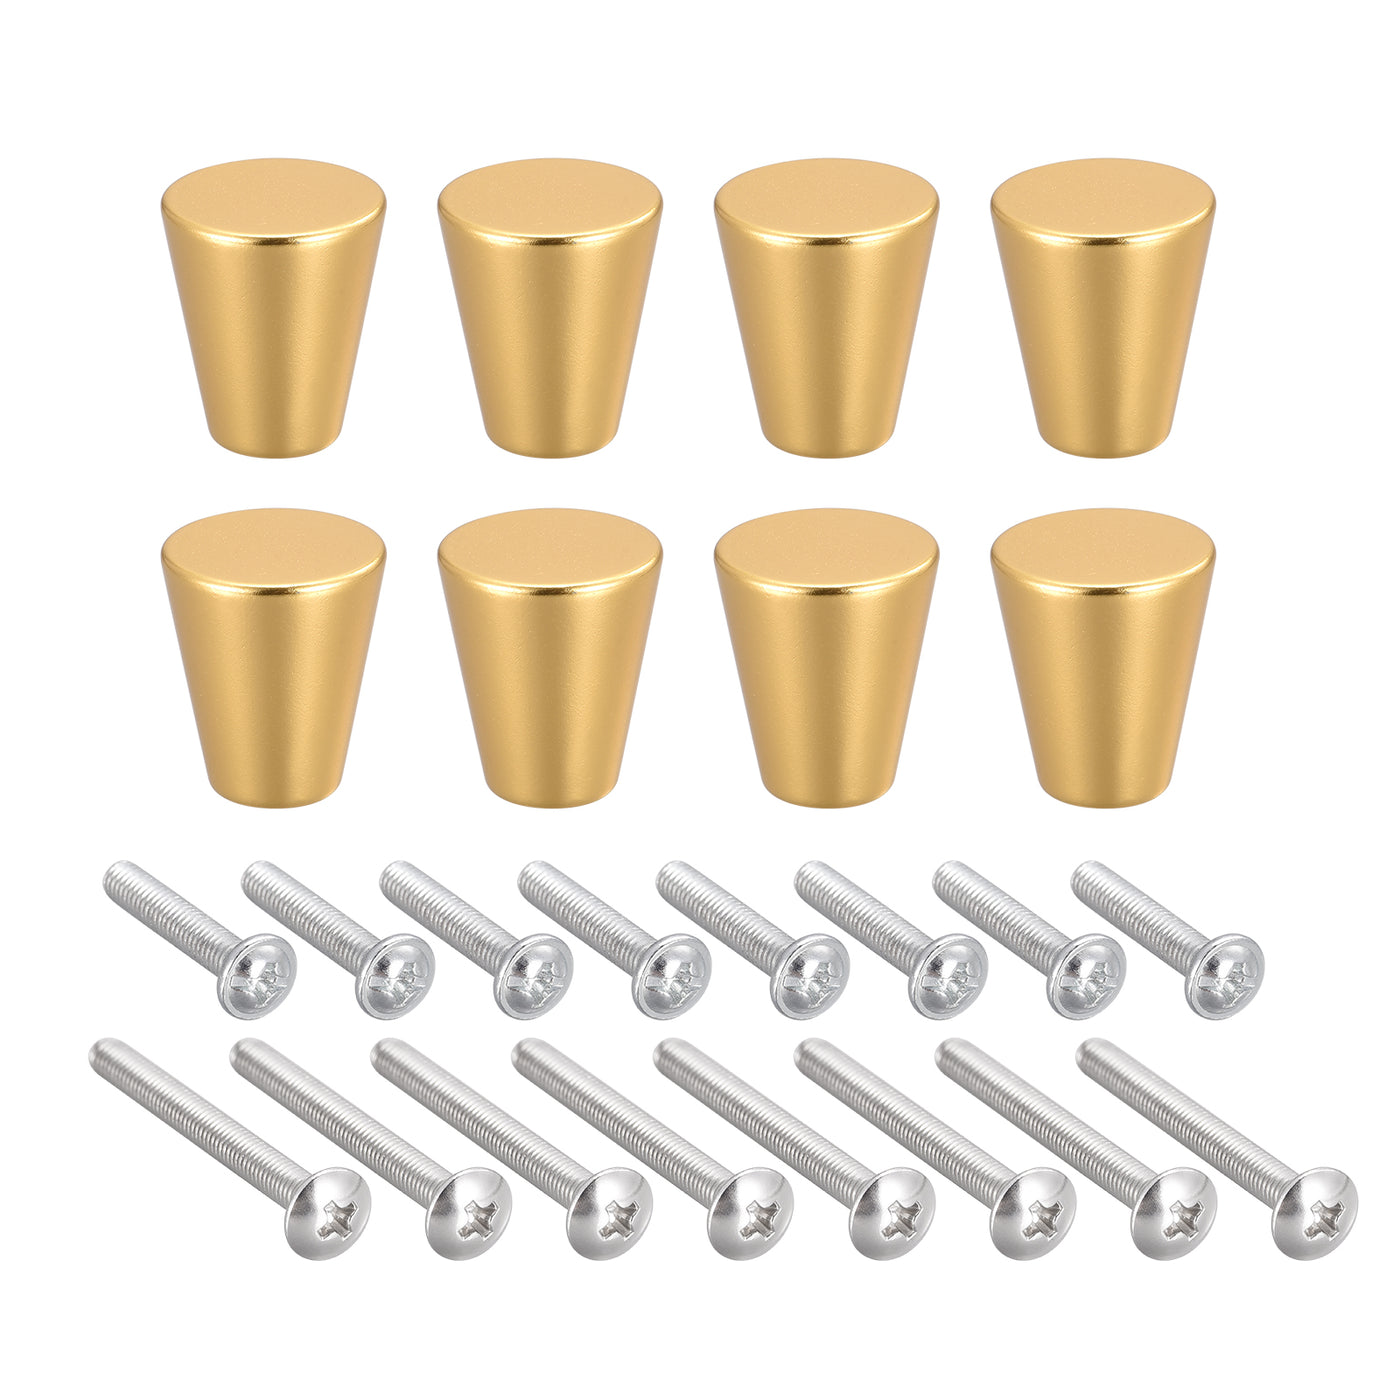 uxcell Uxcell 20x23mm Drawer Knobs, 8pcs Aluminum Alloy Wardrobe Pull Handles Gold Tone